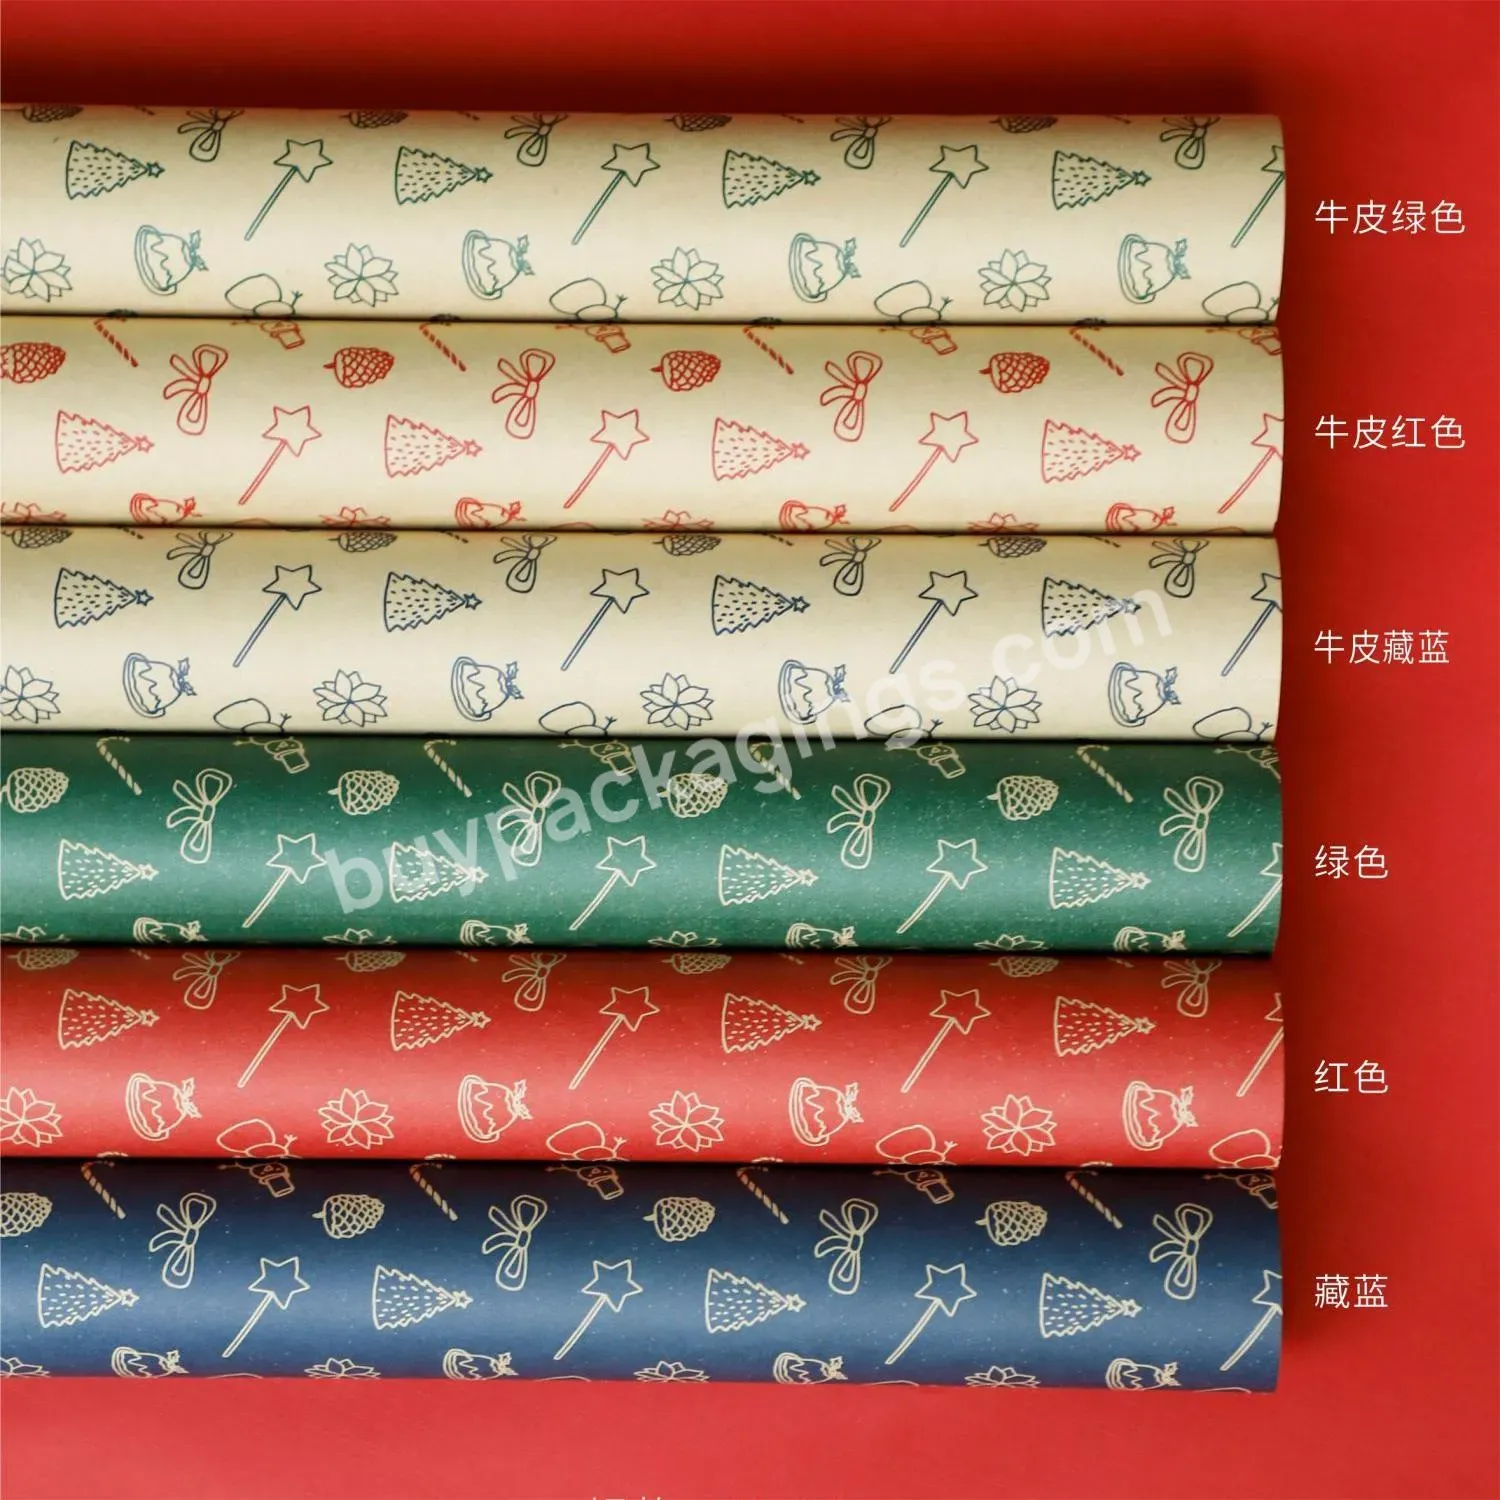 New Christmas Snowman Design Printed 50*70cm 20sheet/bag Gift Wrapping Paper For Xmas Gift Box Wrap - Buy New Christmas Snowman Design Printed Gift Wrapping Paper,50*70cm 20sheet/bag Gift Wrapping Paper,Gift Wrapping Paper For Xmas Gift Box Wrap.